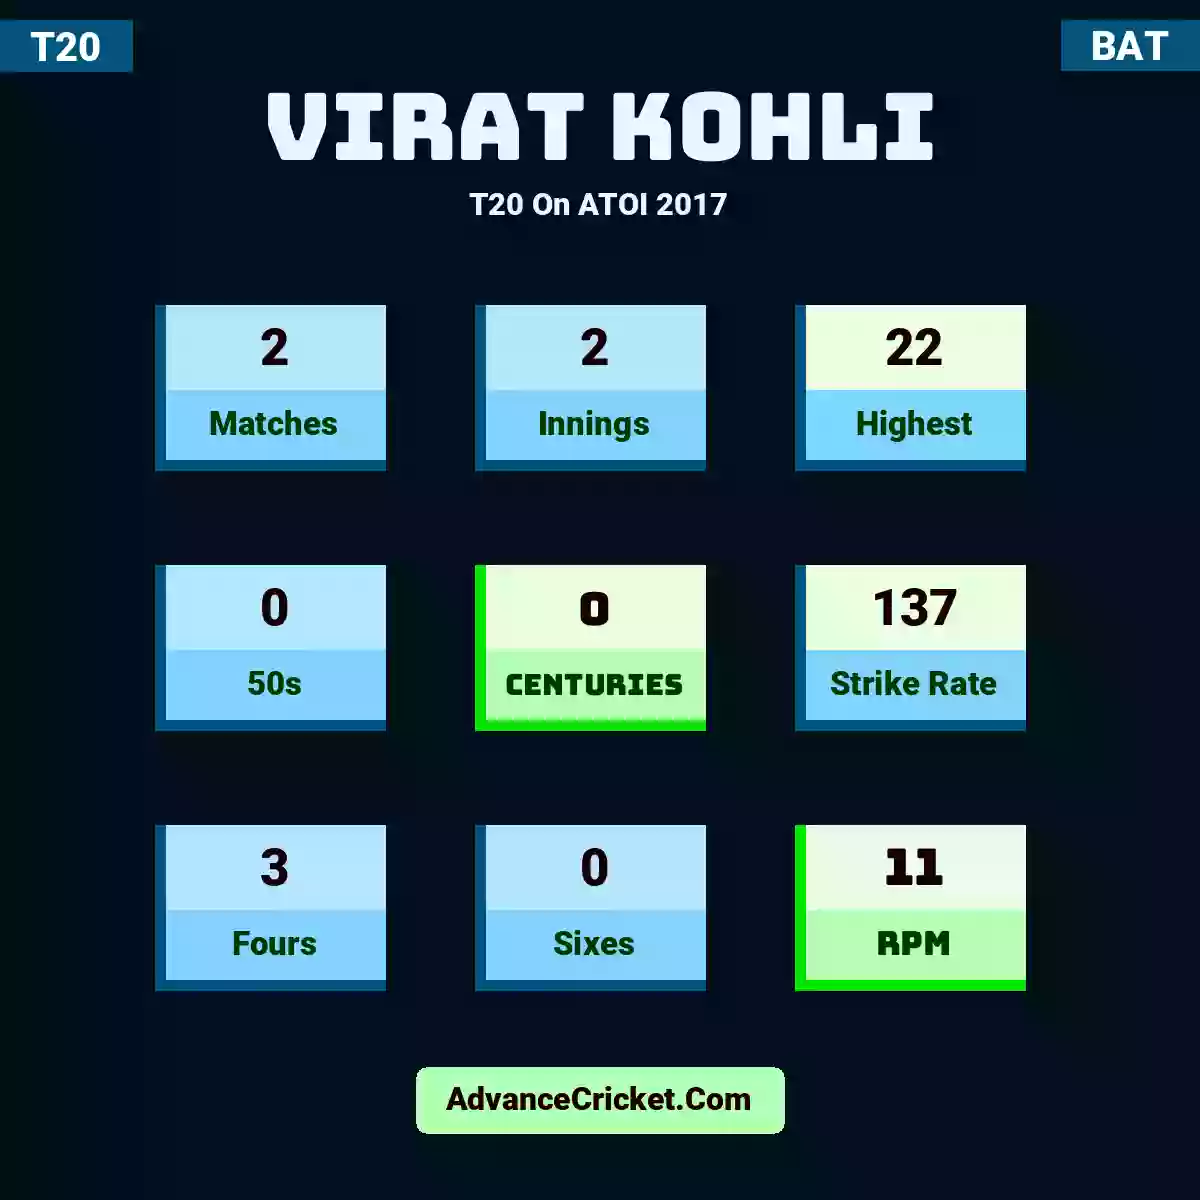 Virat Kohli T20  On ATOI 2017, Virat Kohli played 2 matches, scored 22 runs as highest, 0 half-centuries, and 0 centuries, with a strike rate of 137. V.Kohli hit 3 fours and 0 sixes, with an RPM of 11.